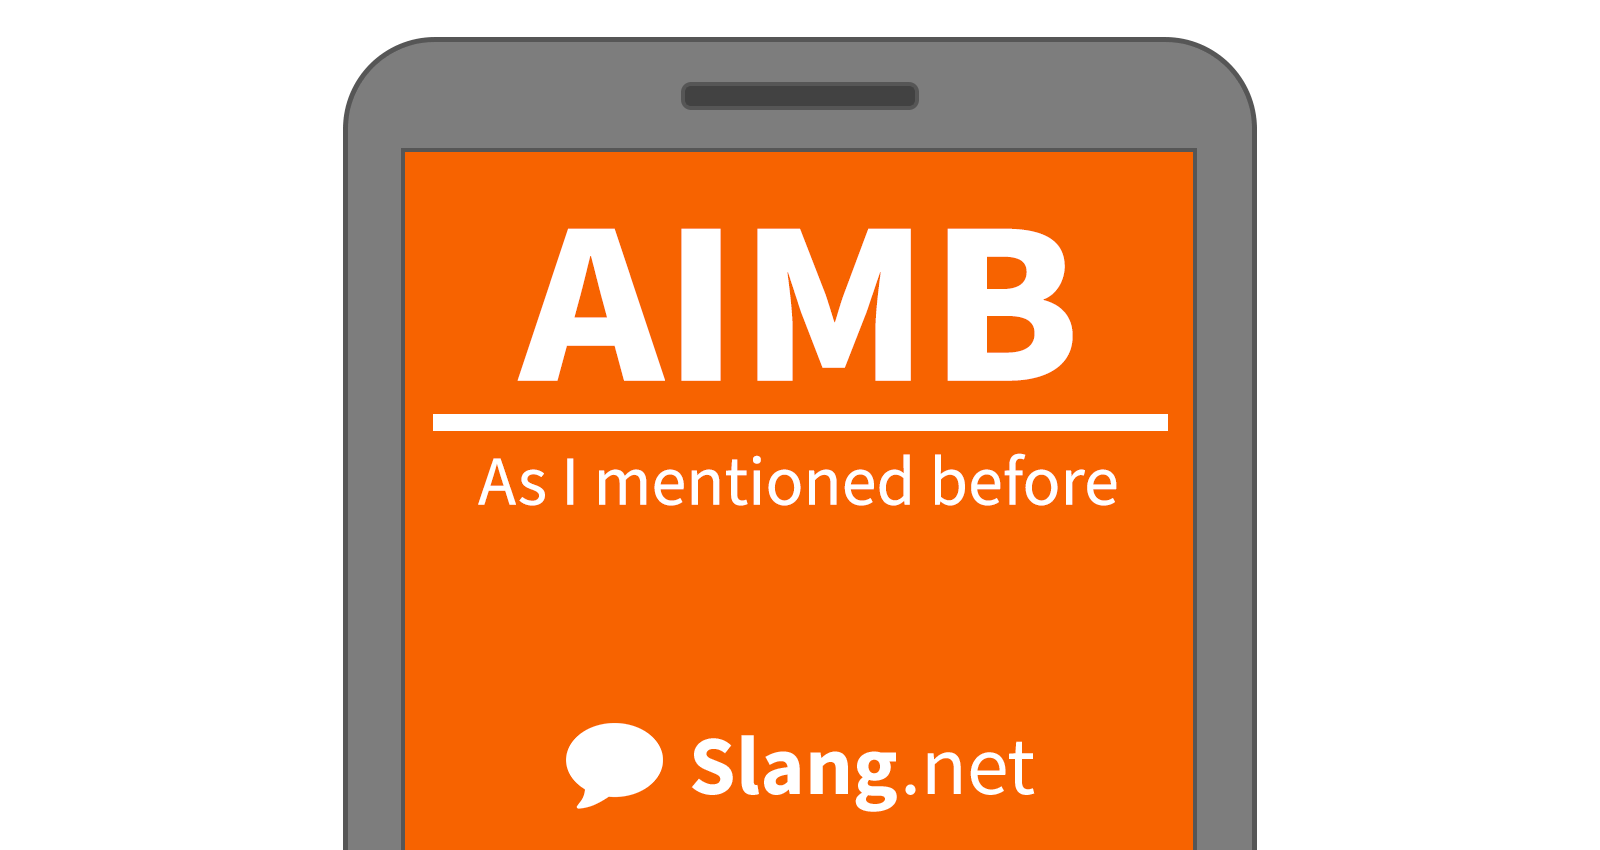 AIMB stands for &quot;as I mentioned before&quot;